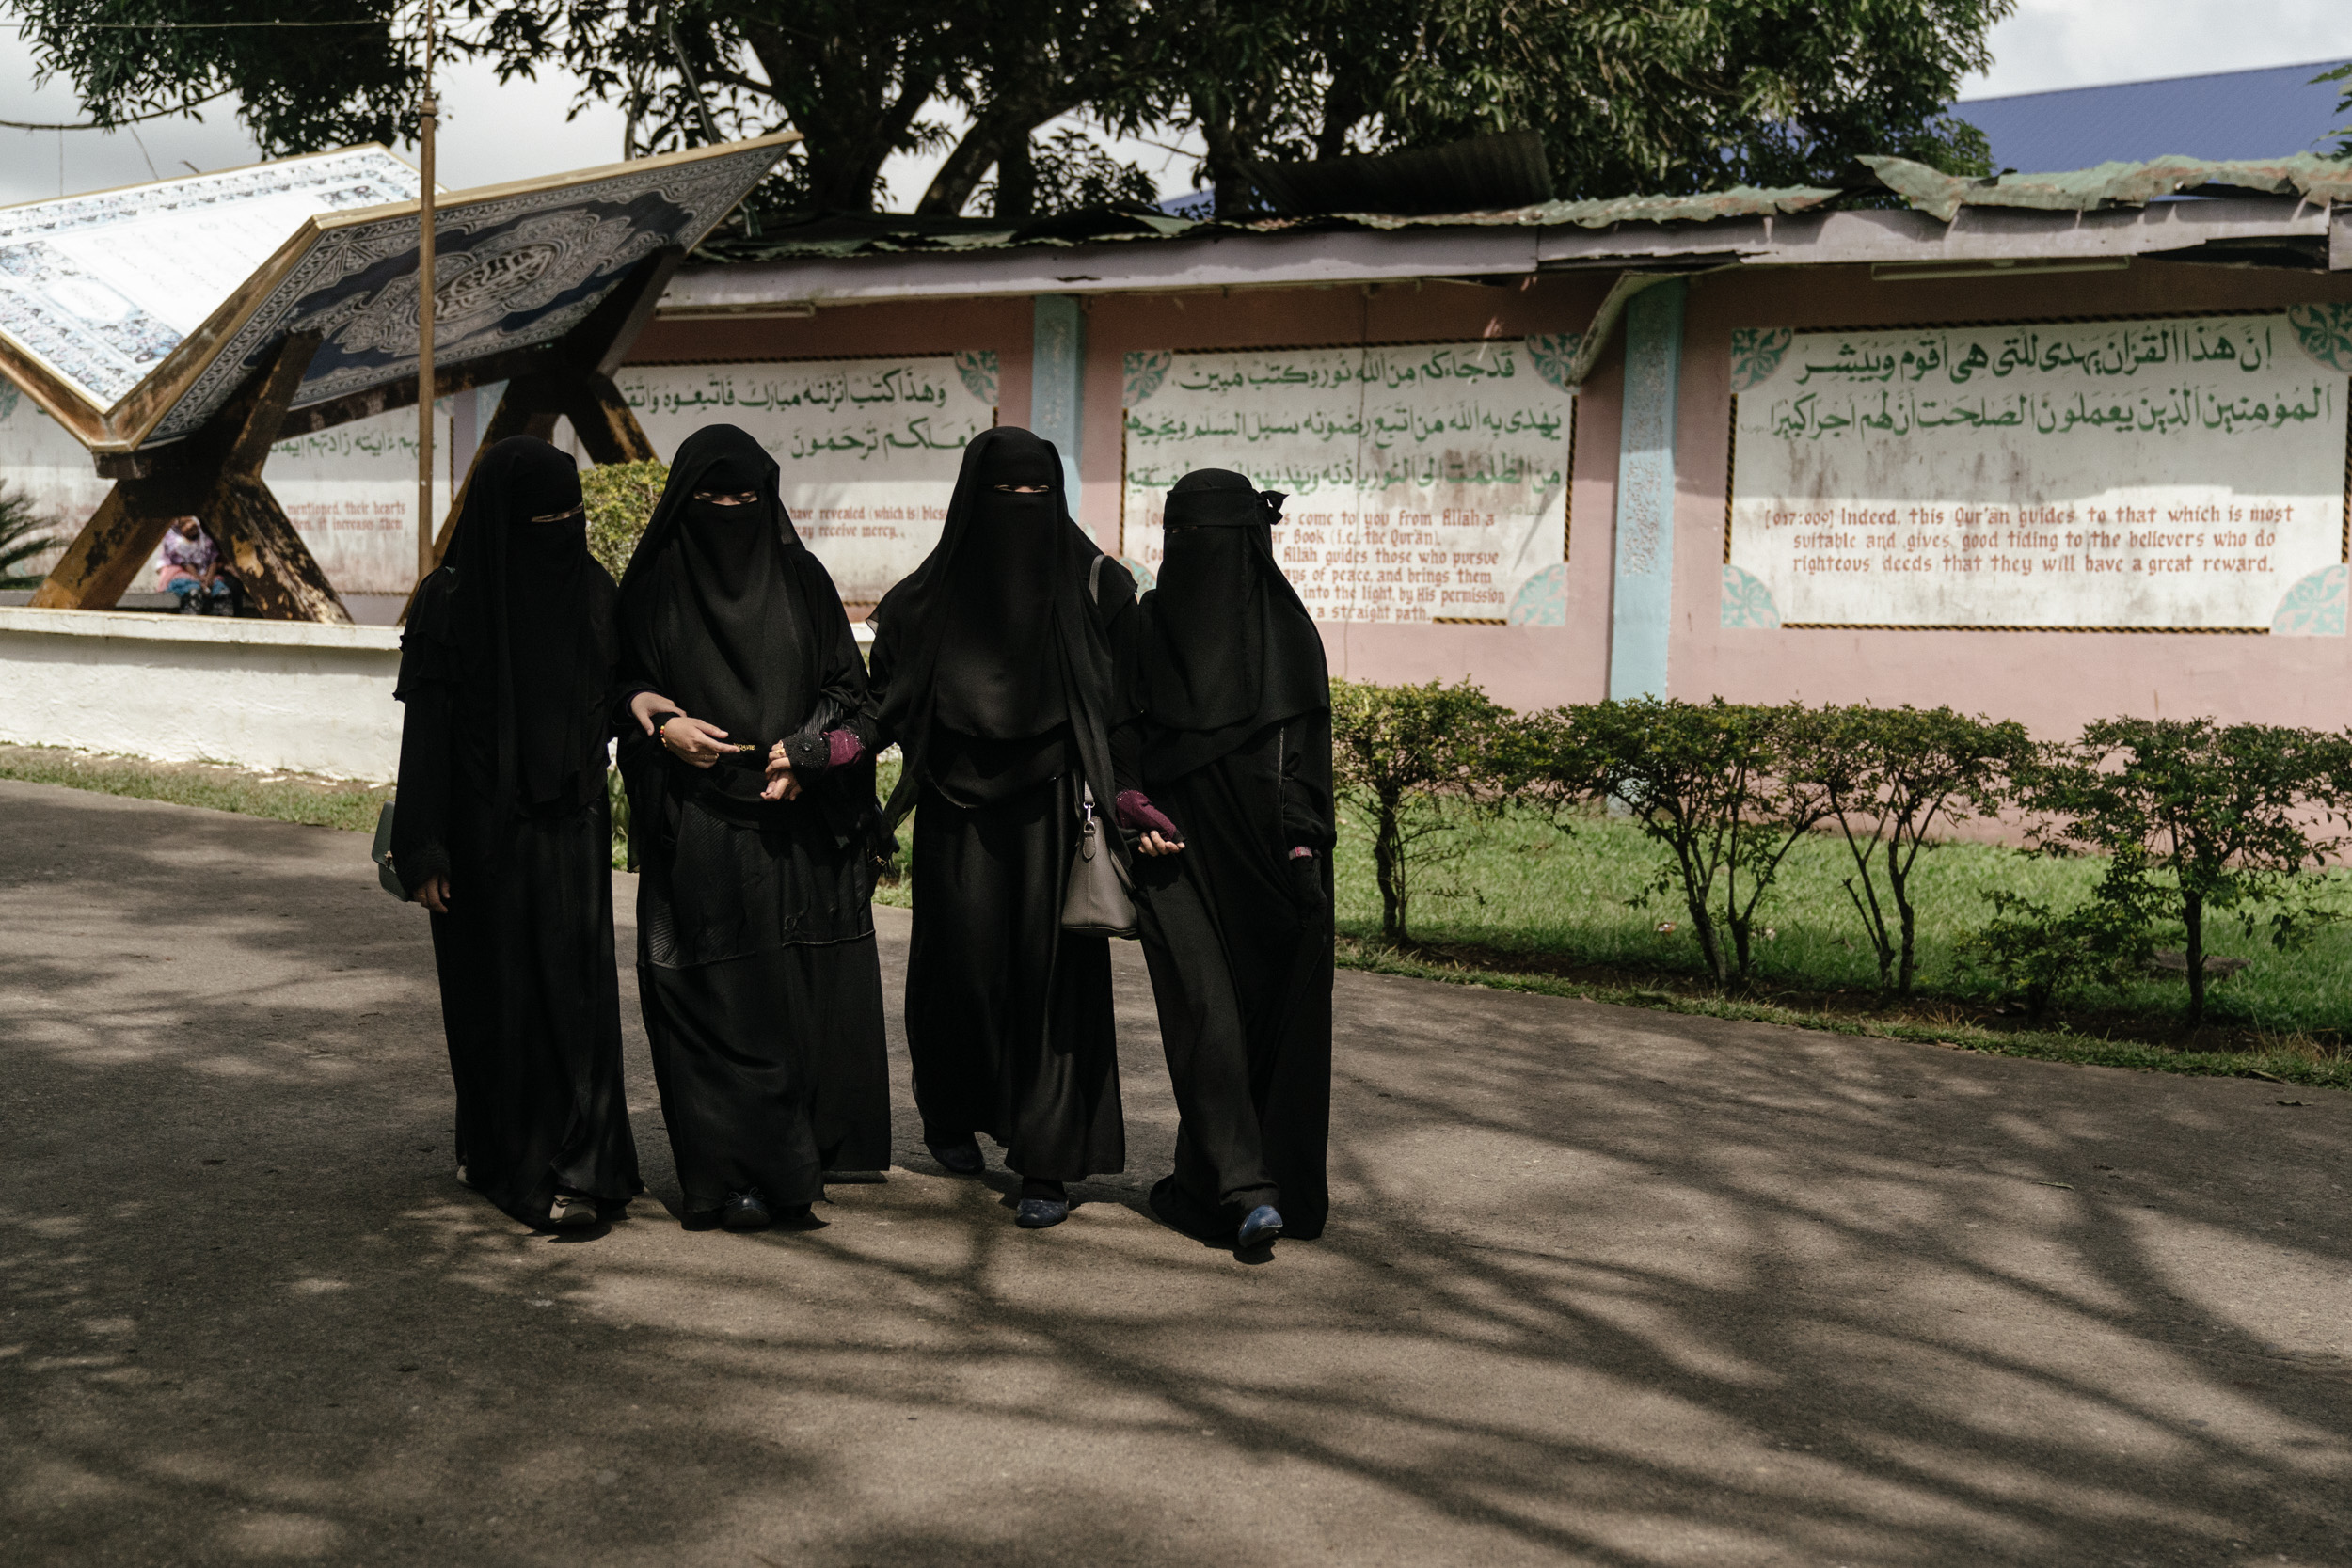  Aishah, Helyah, Najmah, and Amerah are seen near a masjid after prayers. Aishah, Amerah, and Najmah were all in ground zero when the siege happened. For all of them, everything has changed since. 'I wish more people knew that Islam, truly, is for pe